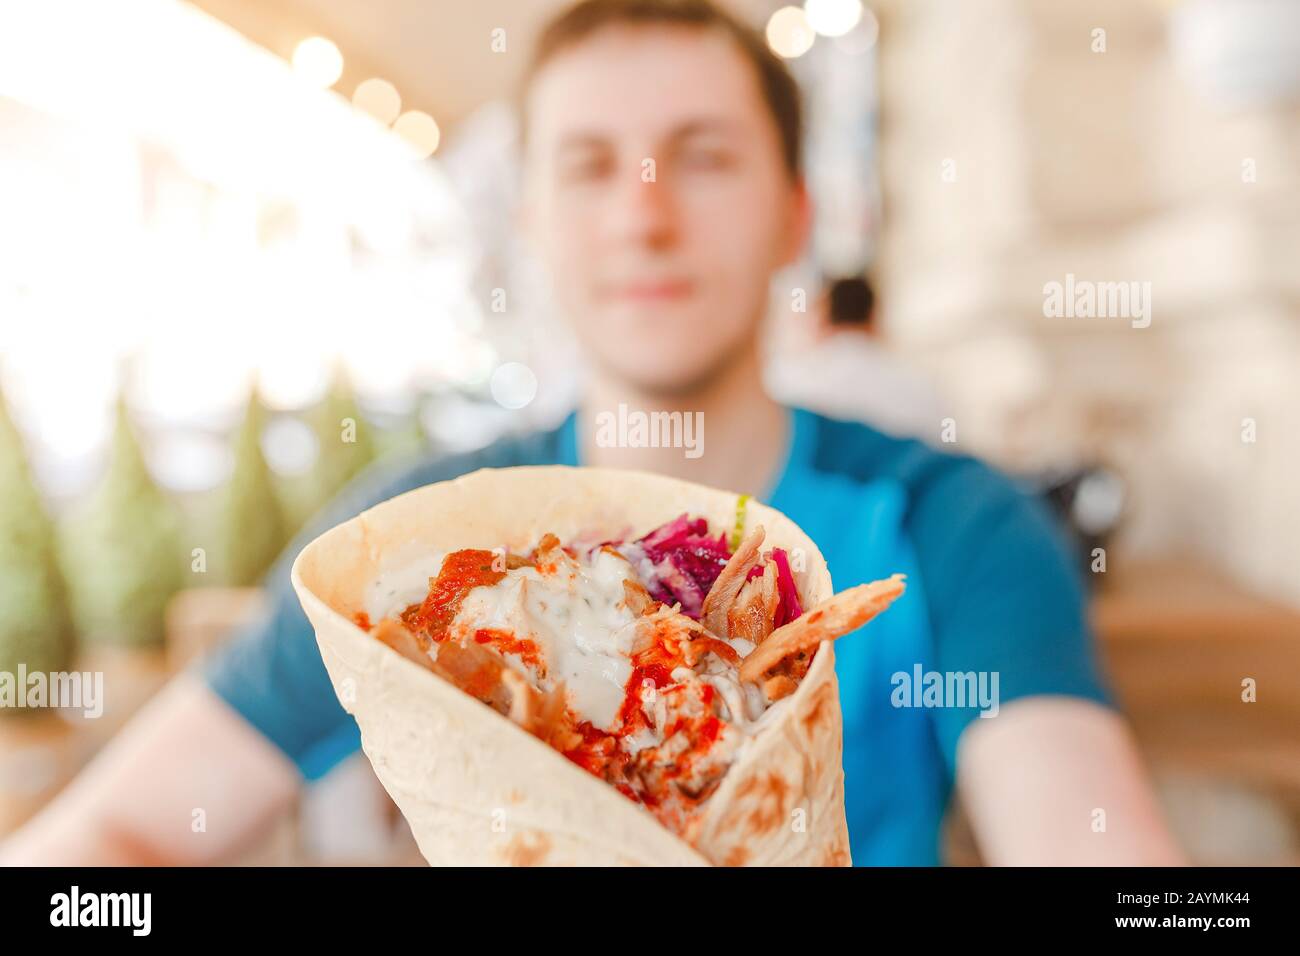 Man eating Doner Kebap its a midlle eastern fast food cuisine Stock Photo